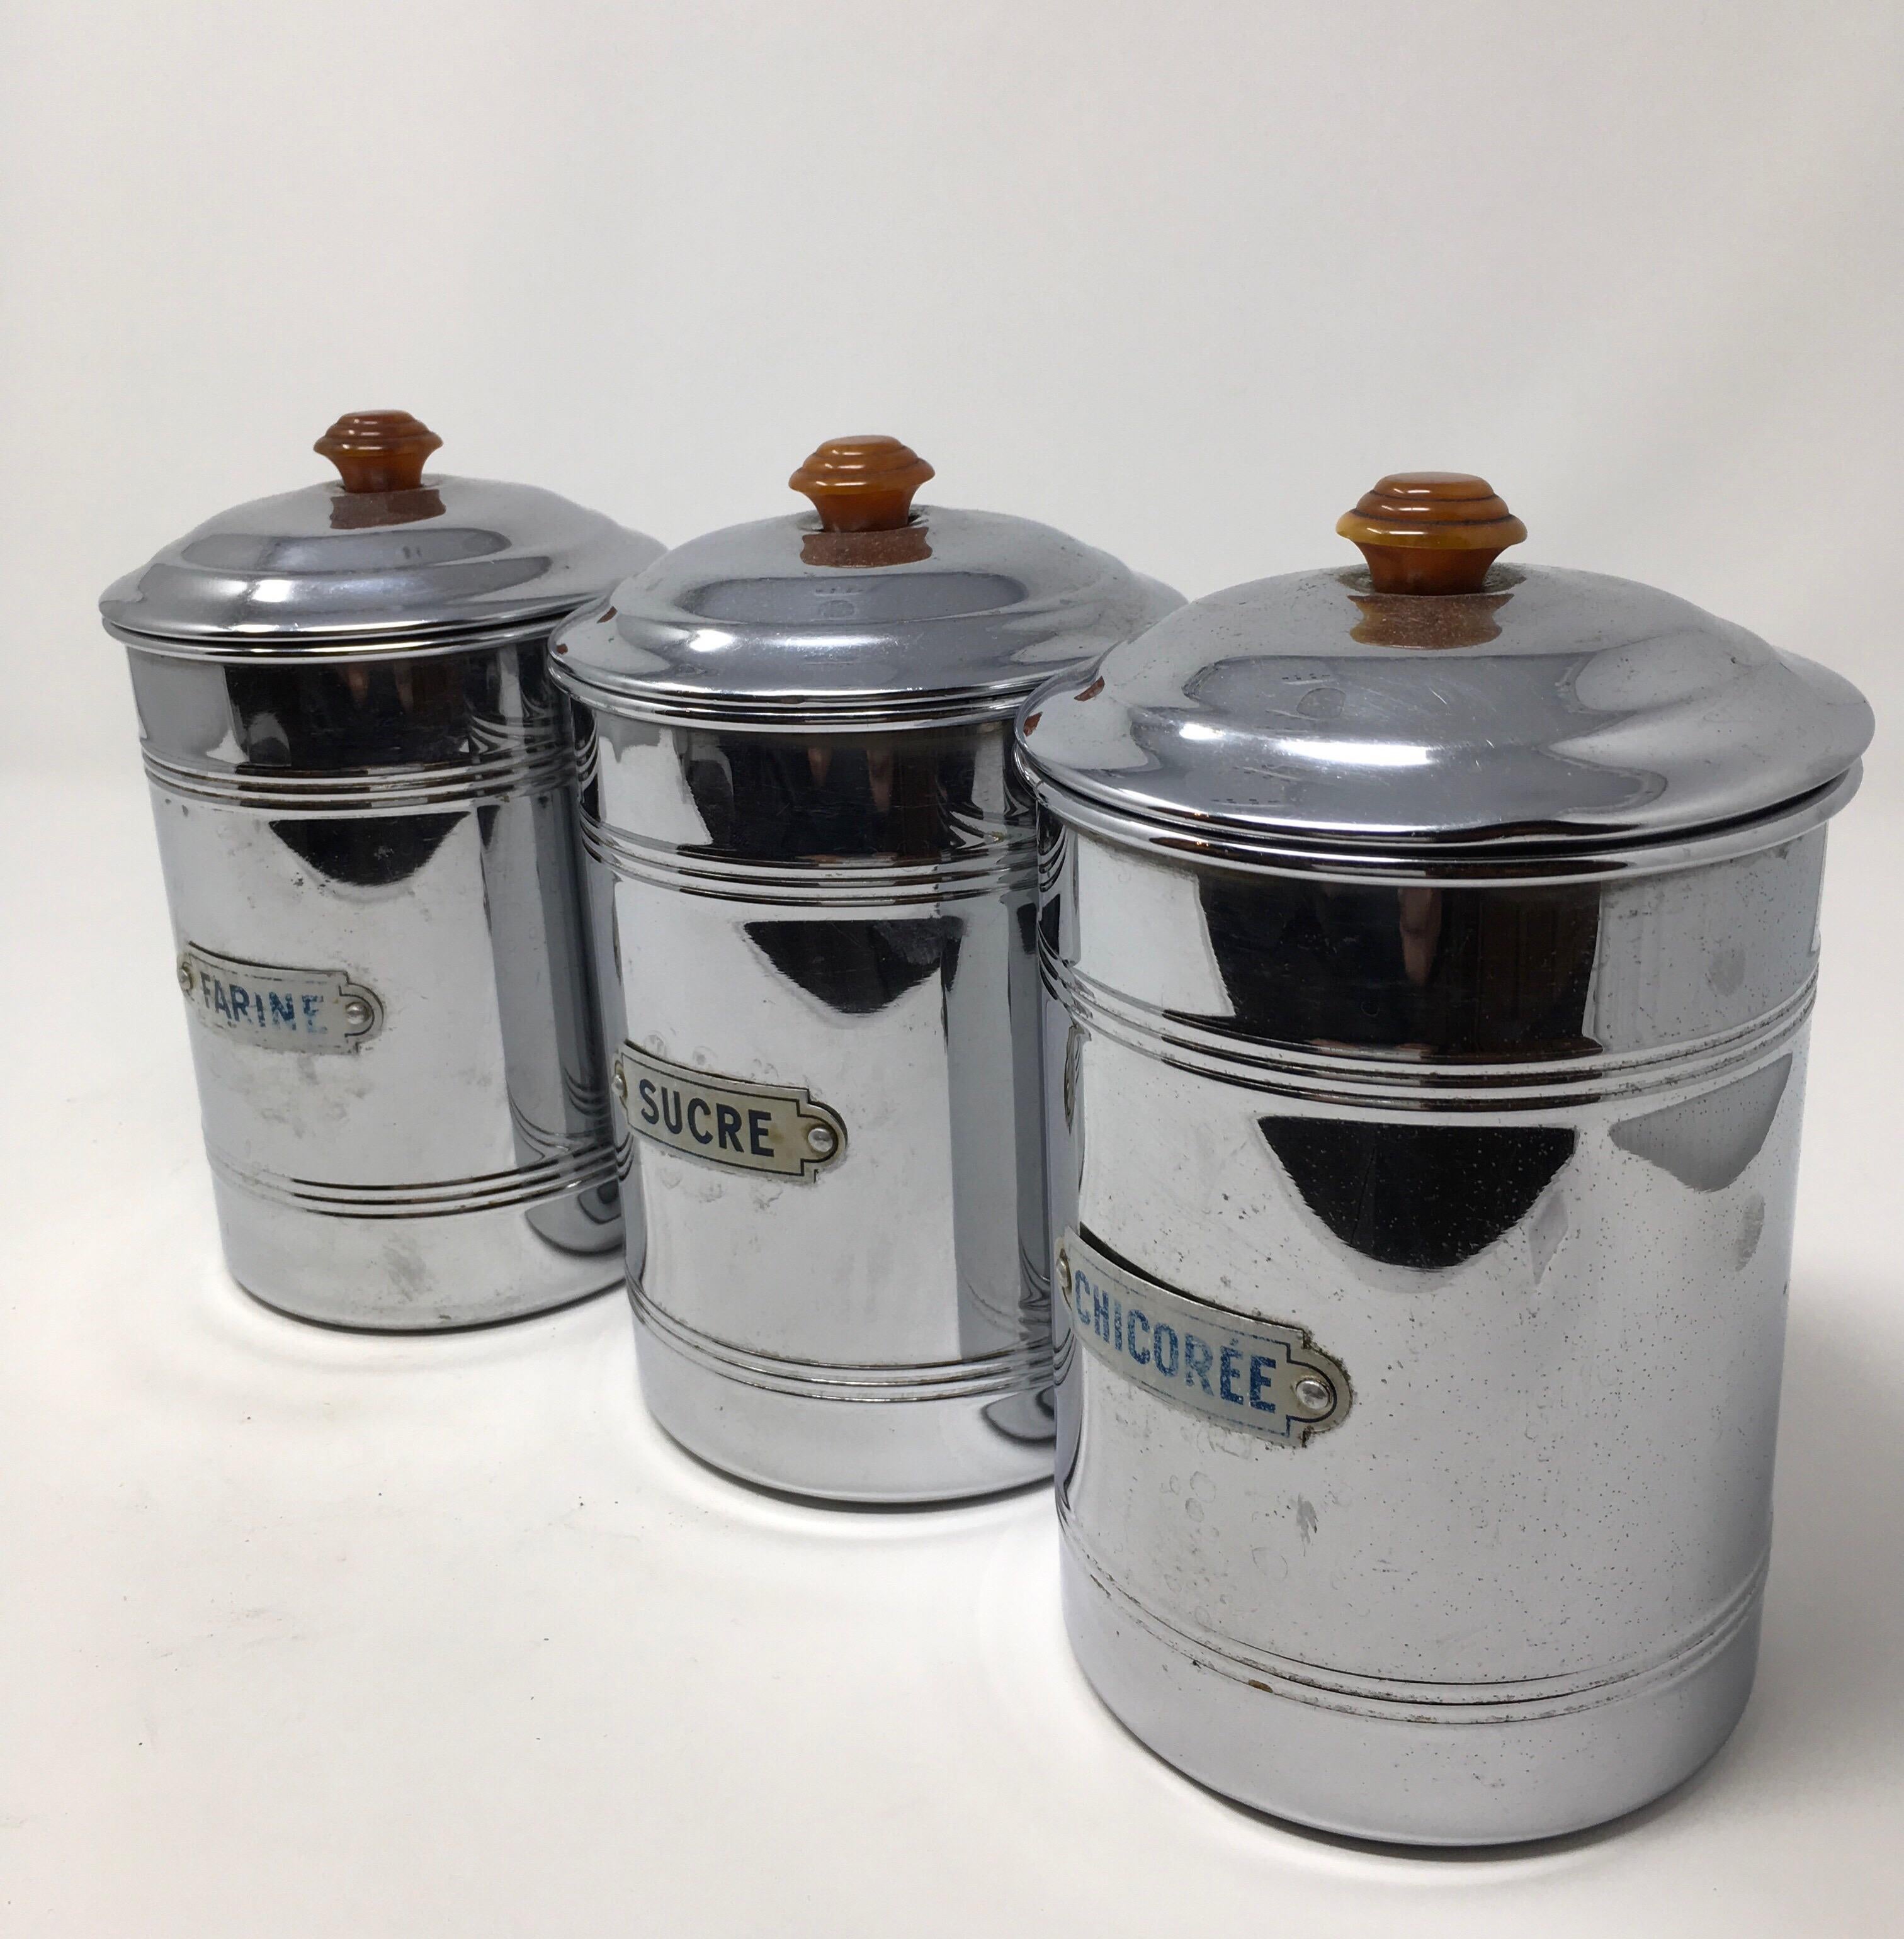 This French tin canister set consists of three equal size lidded canisters. The canisters are tin with plaques reading, Farine - flour, Sucre - sugar and Chicoree - chicory. This lovely set will surely add French charm to your kitchen.